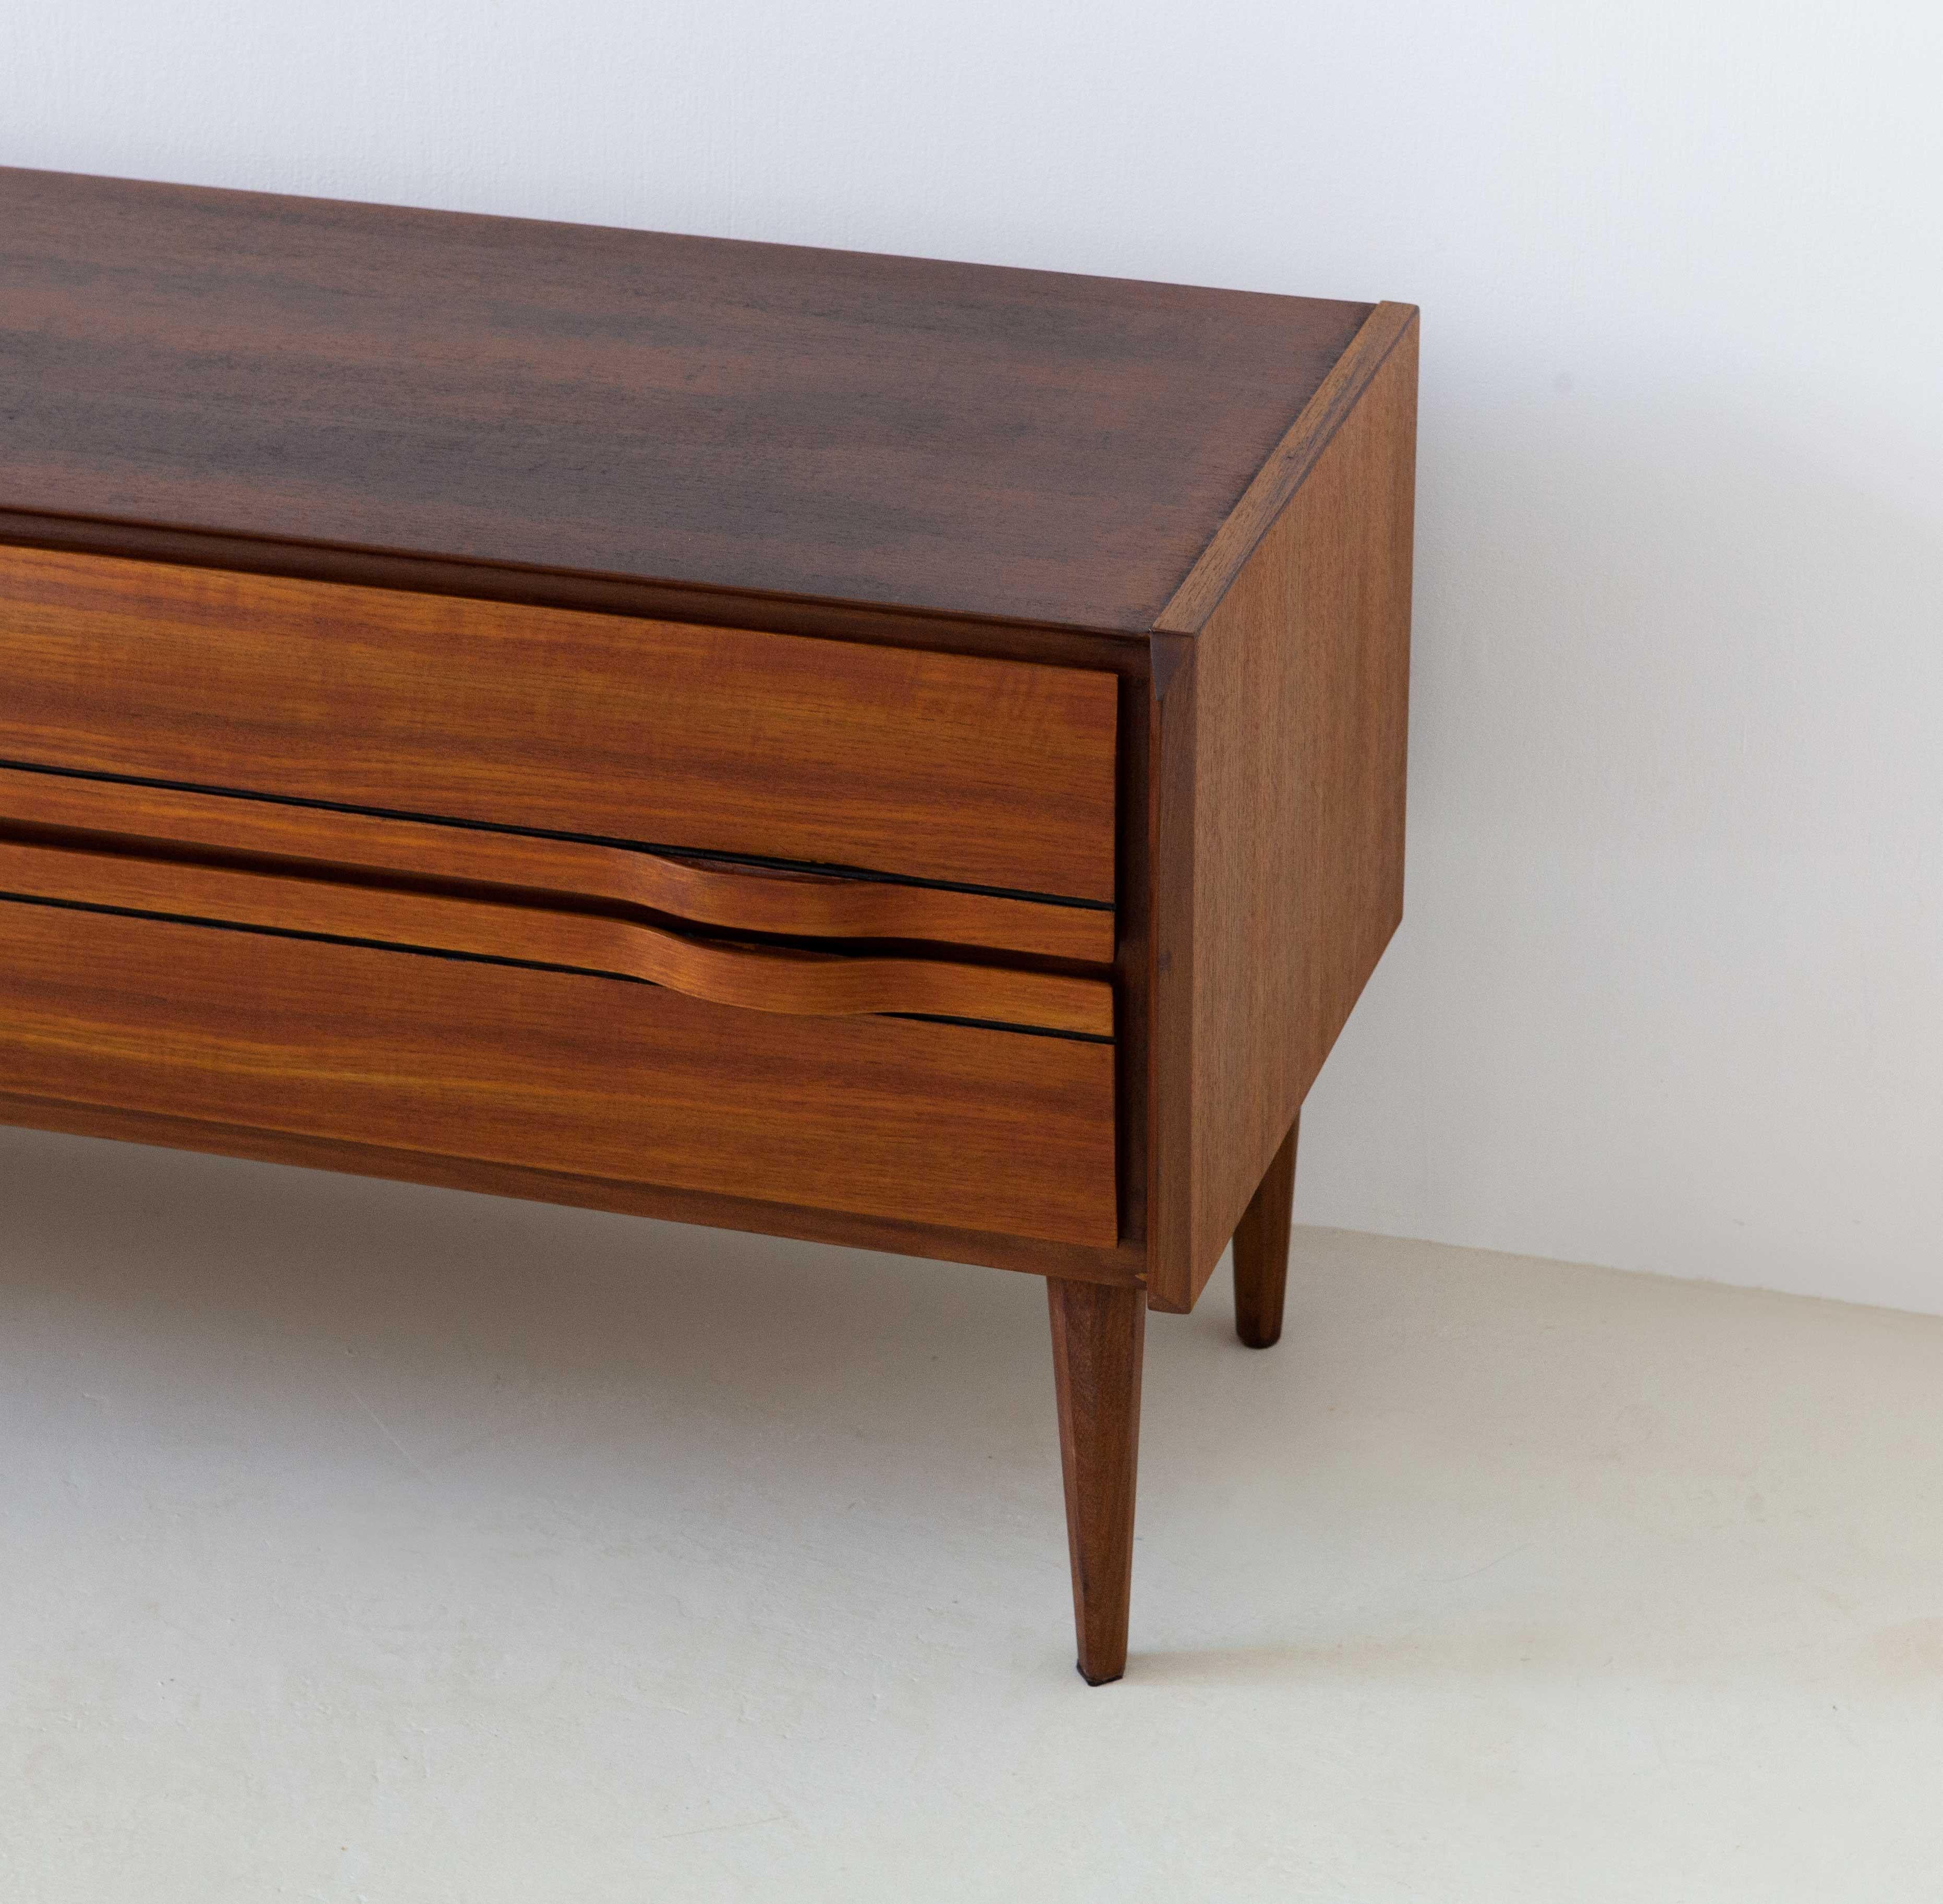 Mid-20th Century Fully Restored 1950s Italian Teak Sideboard with Drawers